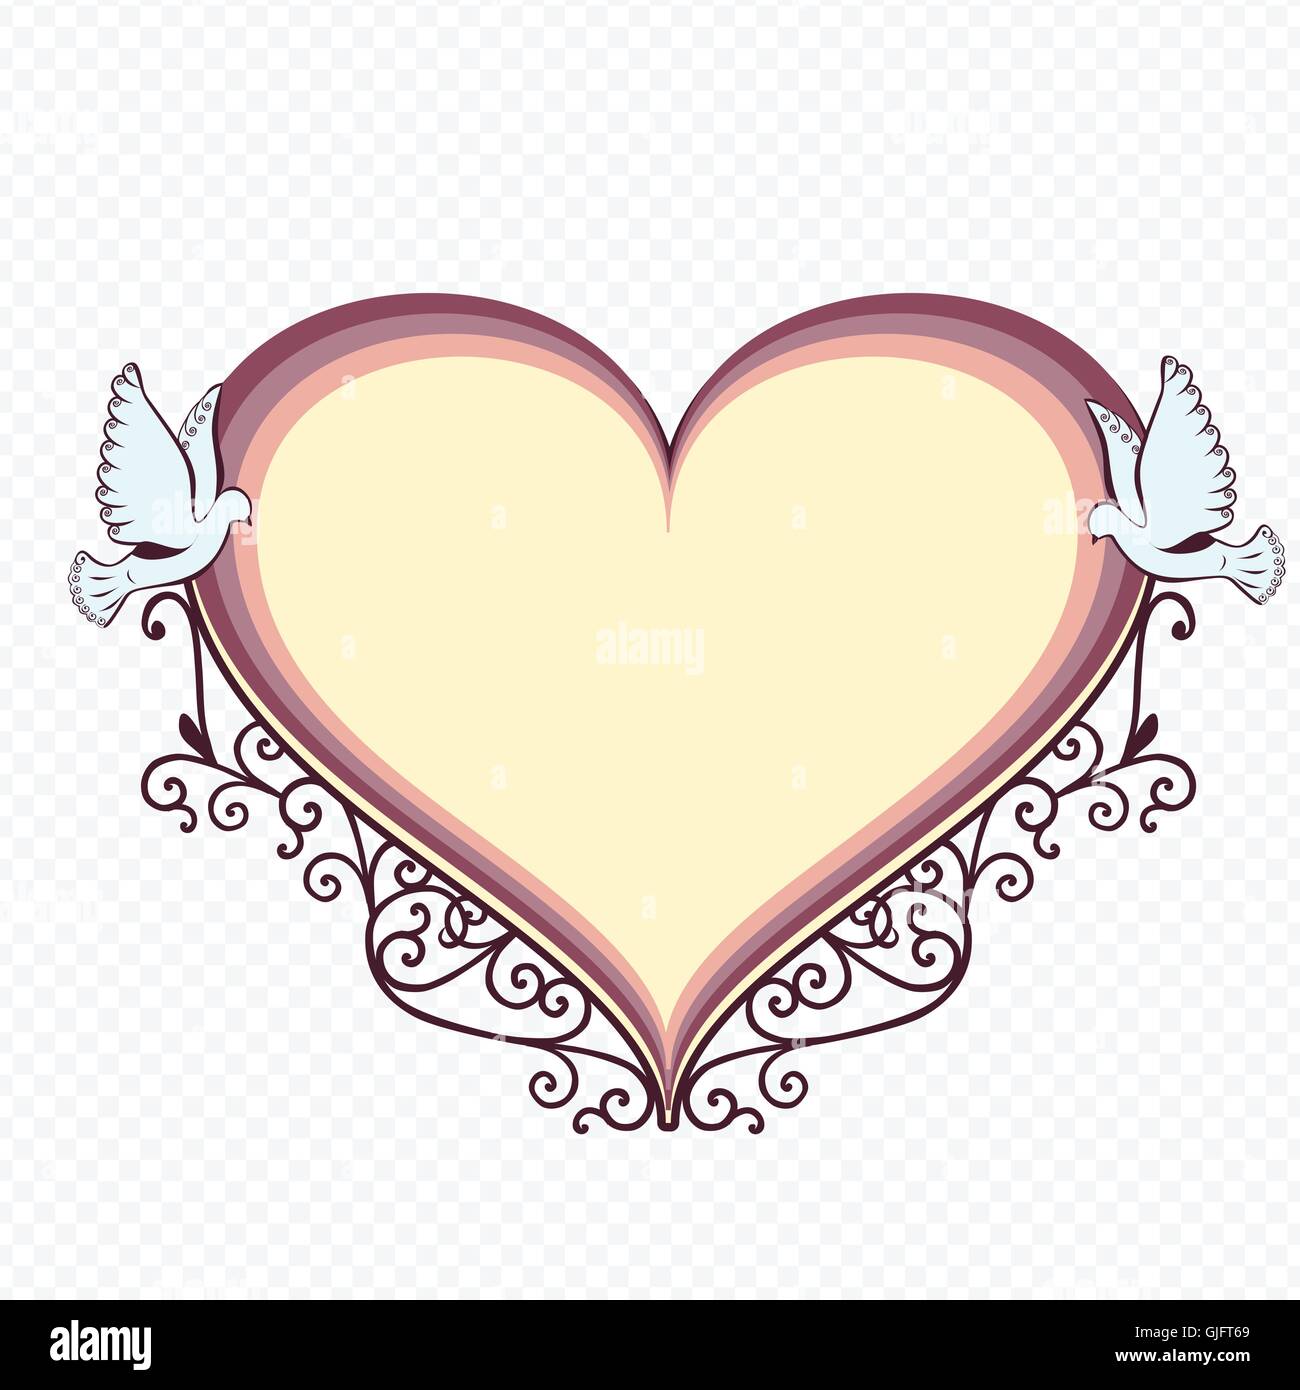 Doves with heartshaped frame. Stock Vector